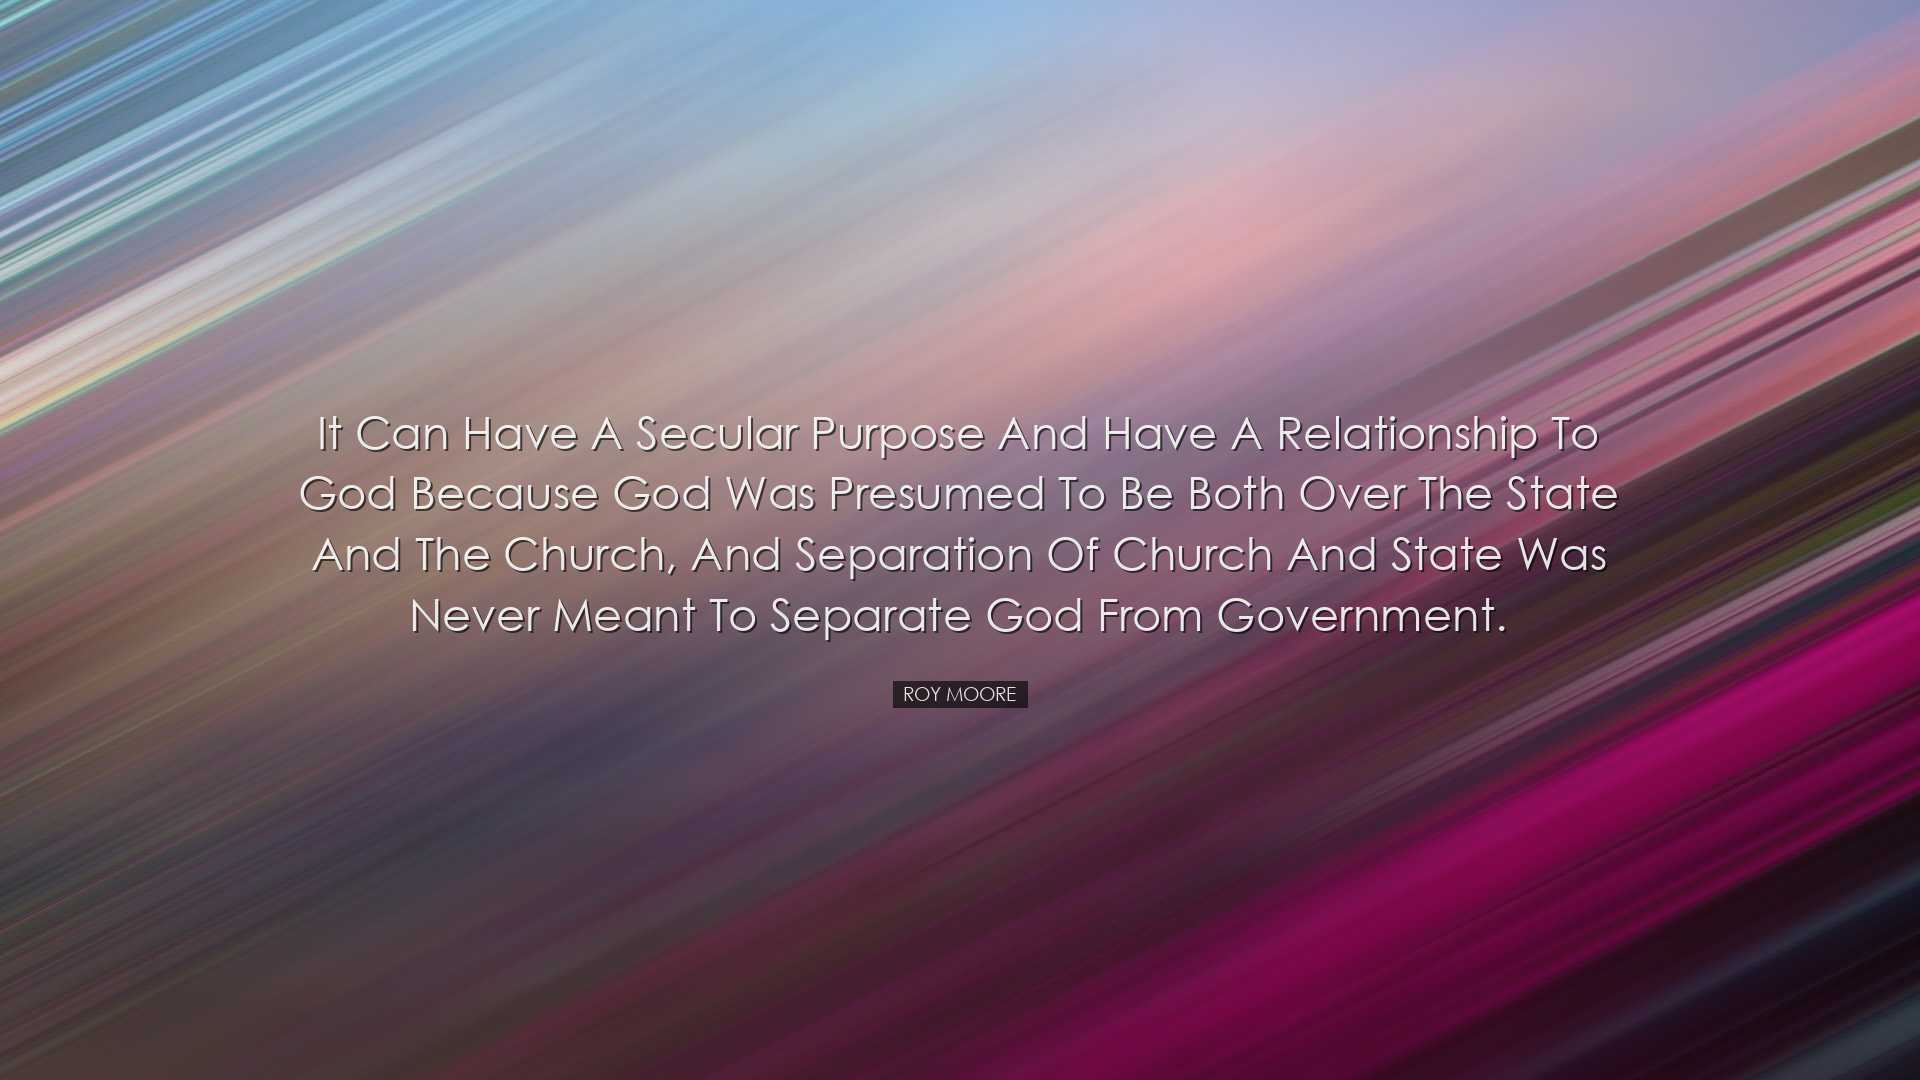 It can have a secular purpose and have a relationship to God becau